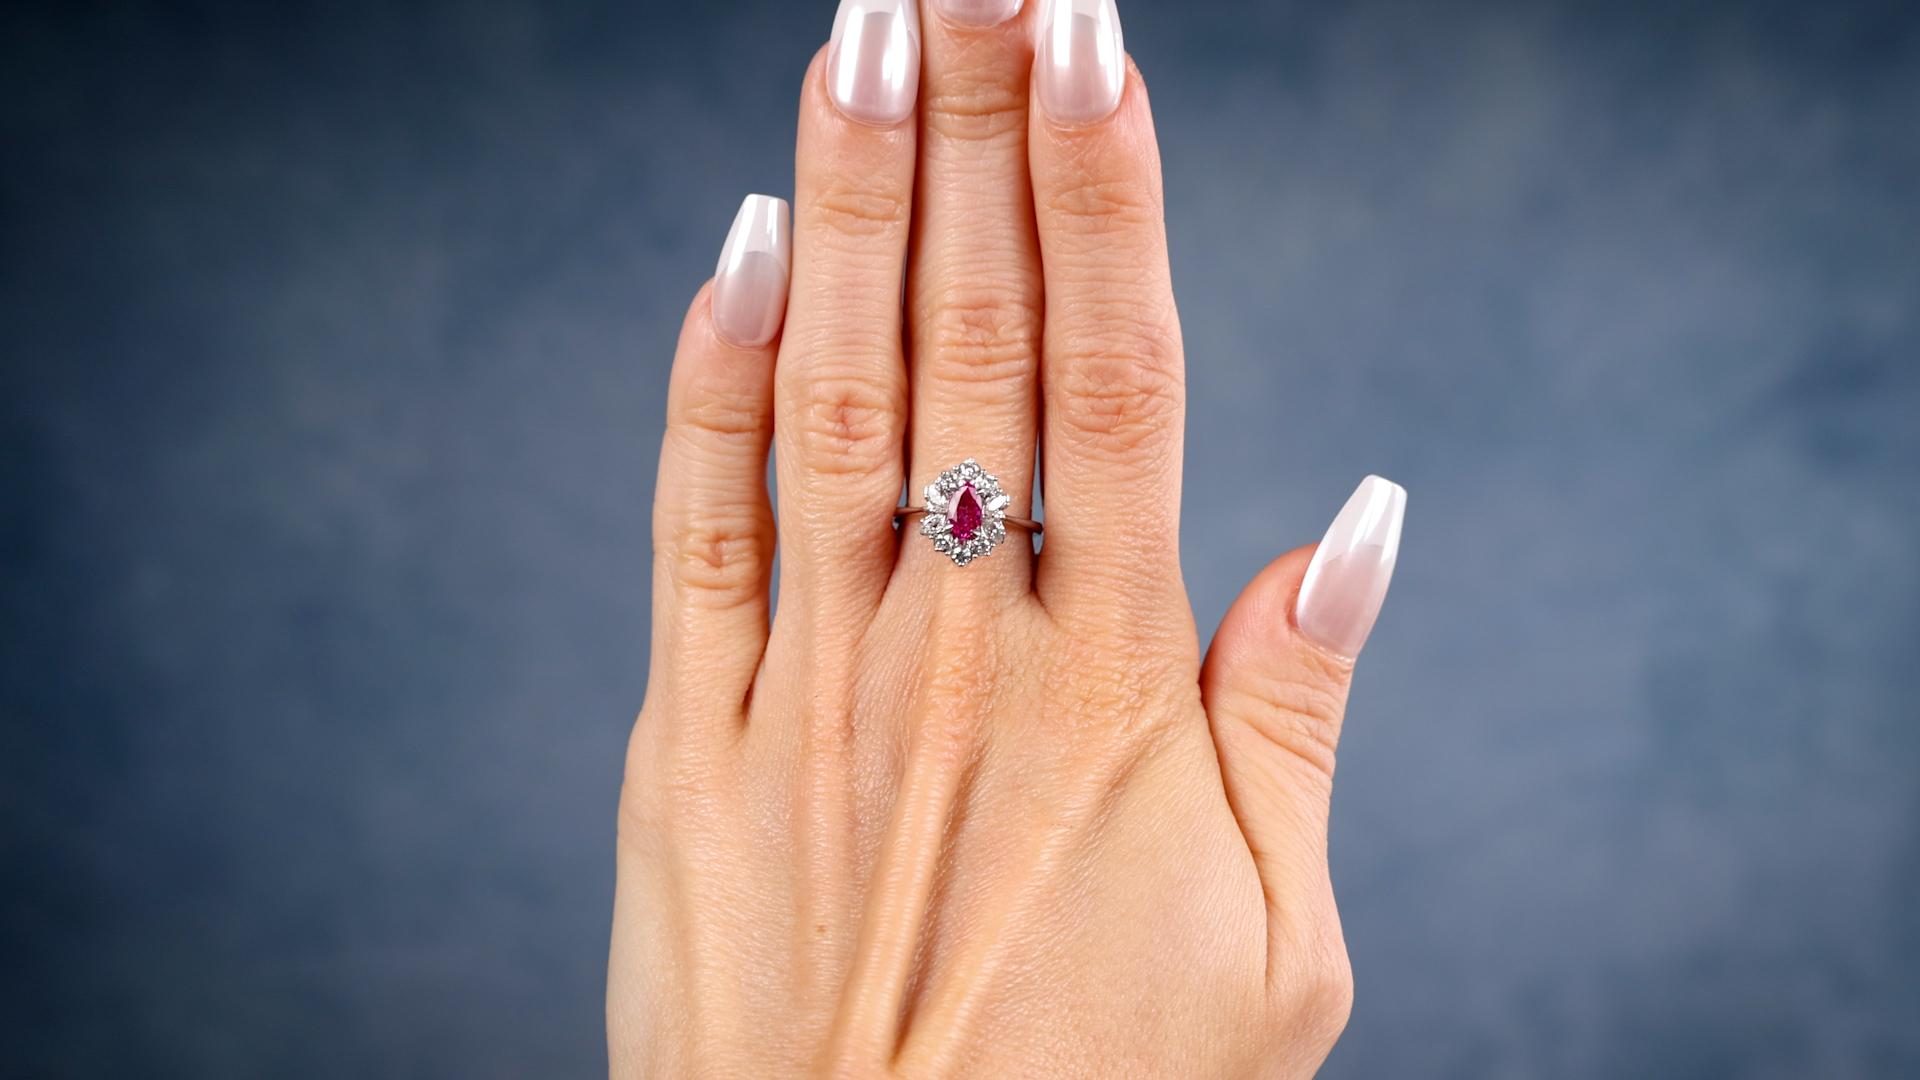 One Vintage Ruby Diamond 18k White Gold Cluster Ring. Featuring one marquise cut ruby weighing approximately 0.55 carat. Accented by six round brilliant and four marquise cut diamonds with a total weight of approximately 0.25 carat, graded